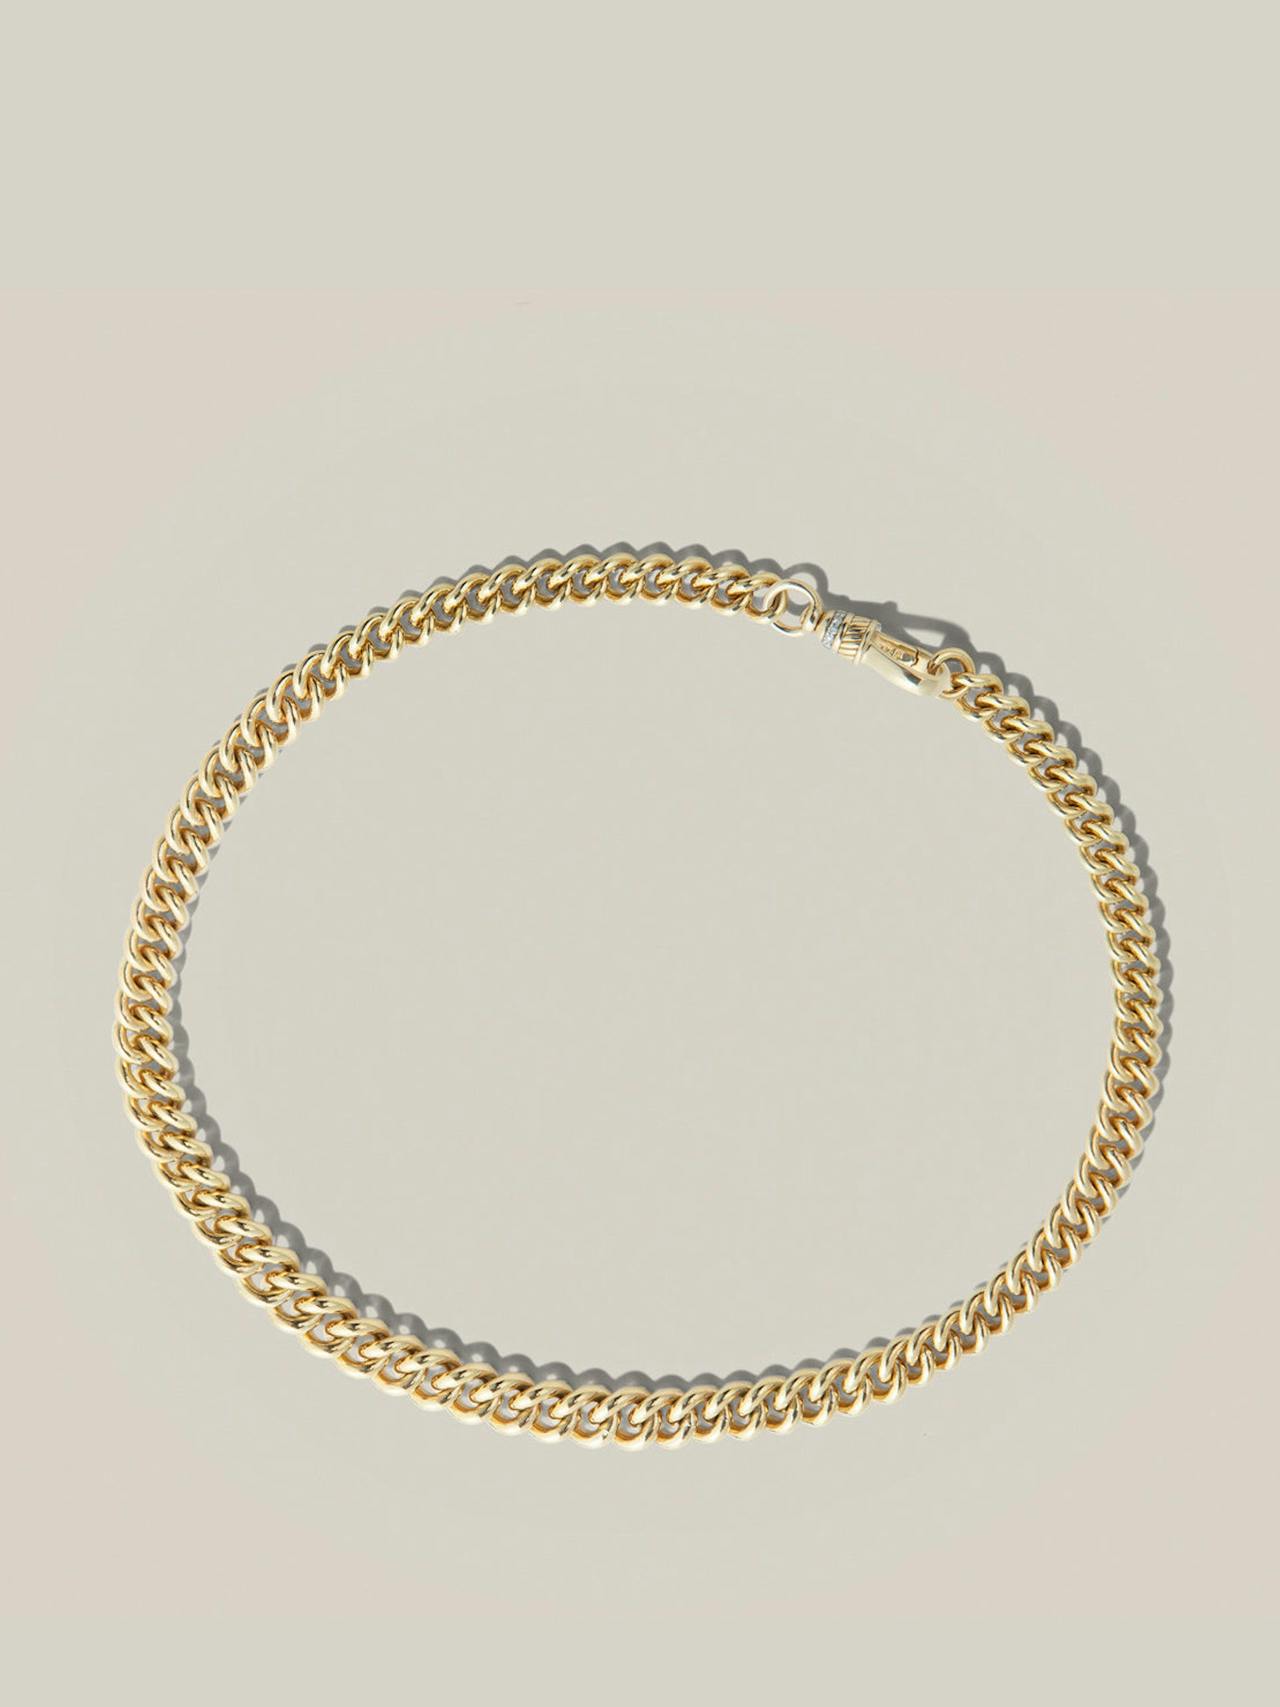 Graduated curb link necklace